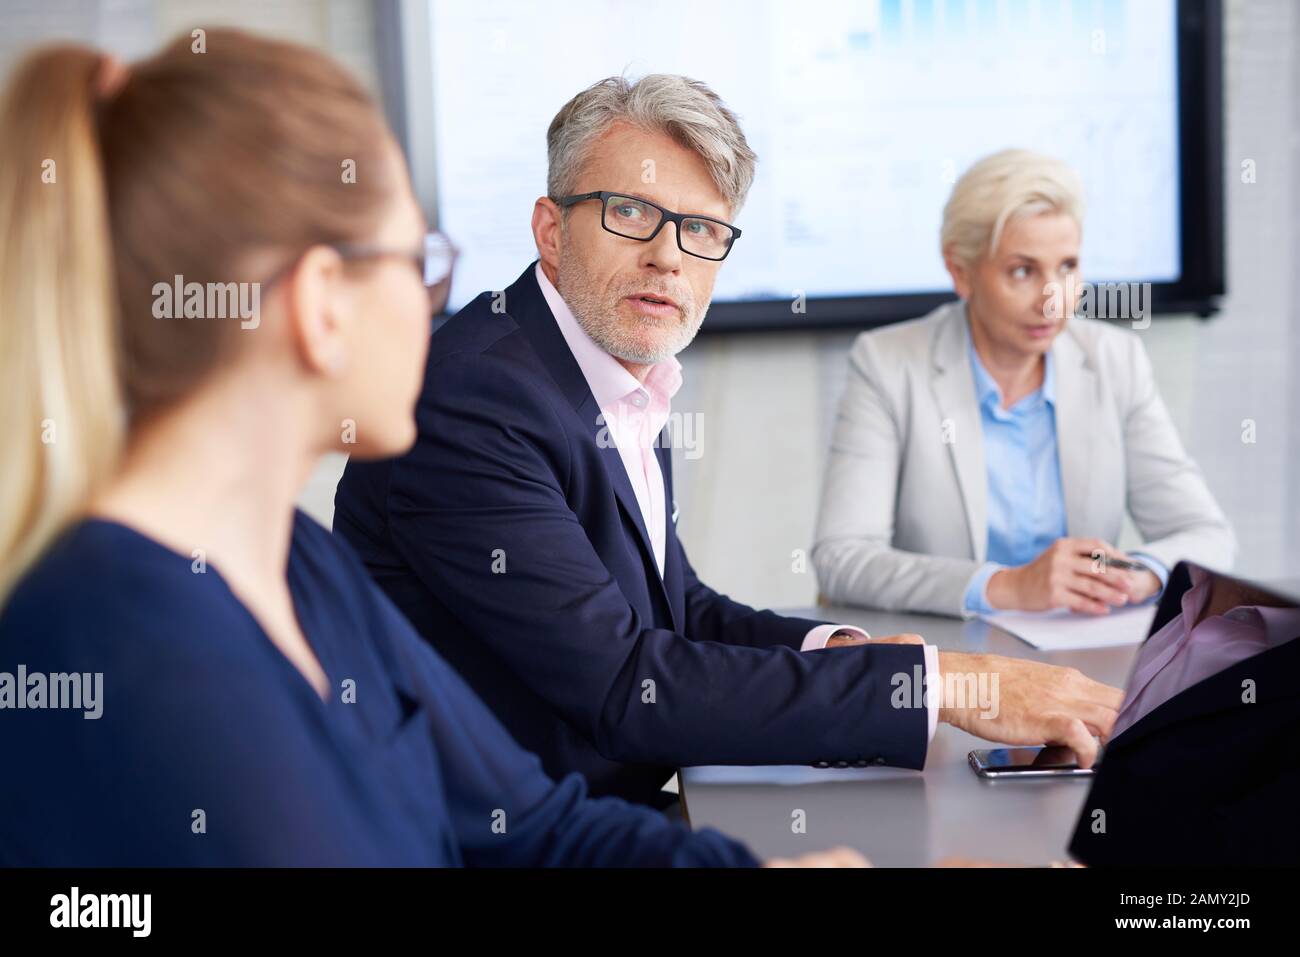 Confident leader convincing about his opinion during conference Stock Photo